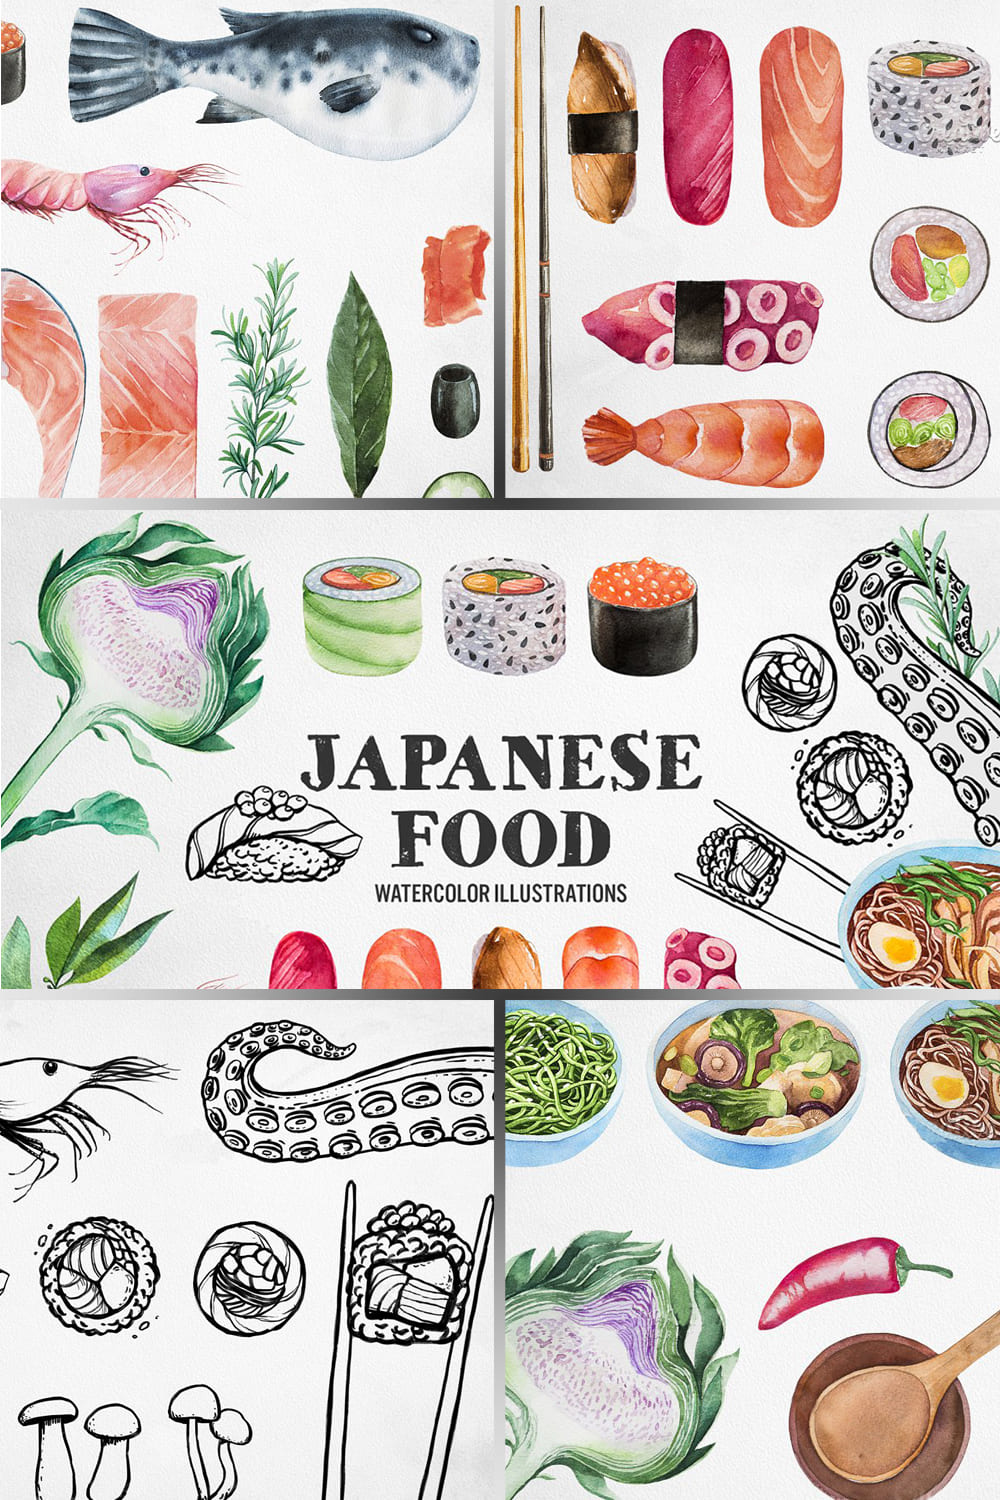 Japanese Food. Watercolor and Ink pinterest image.